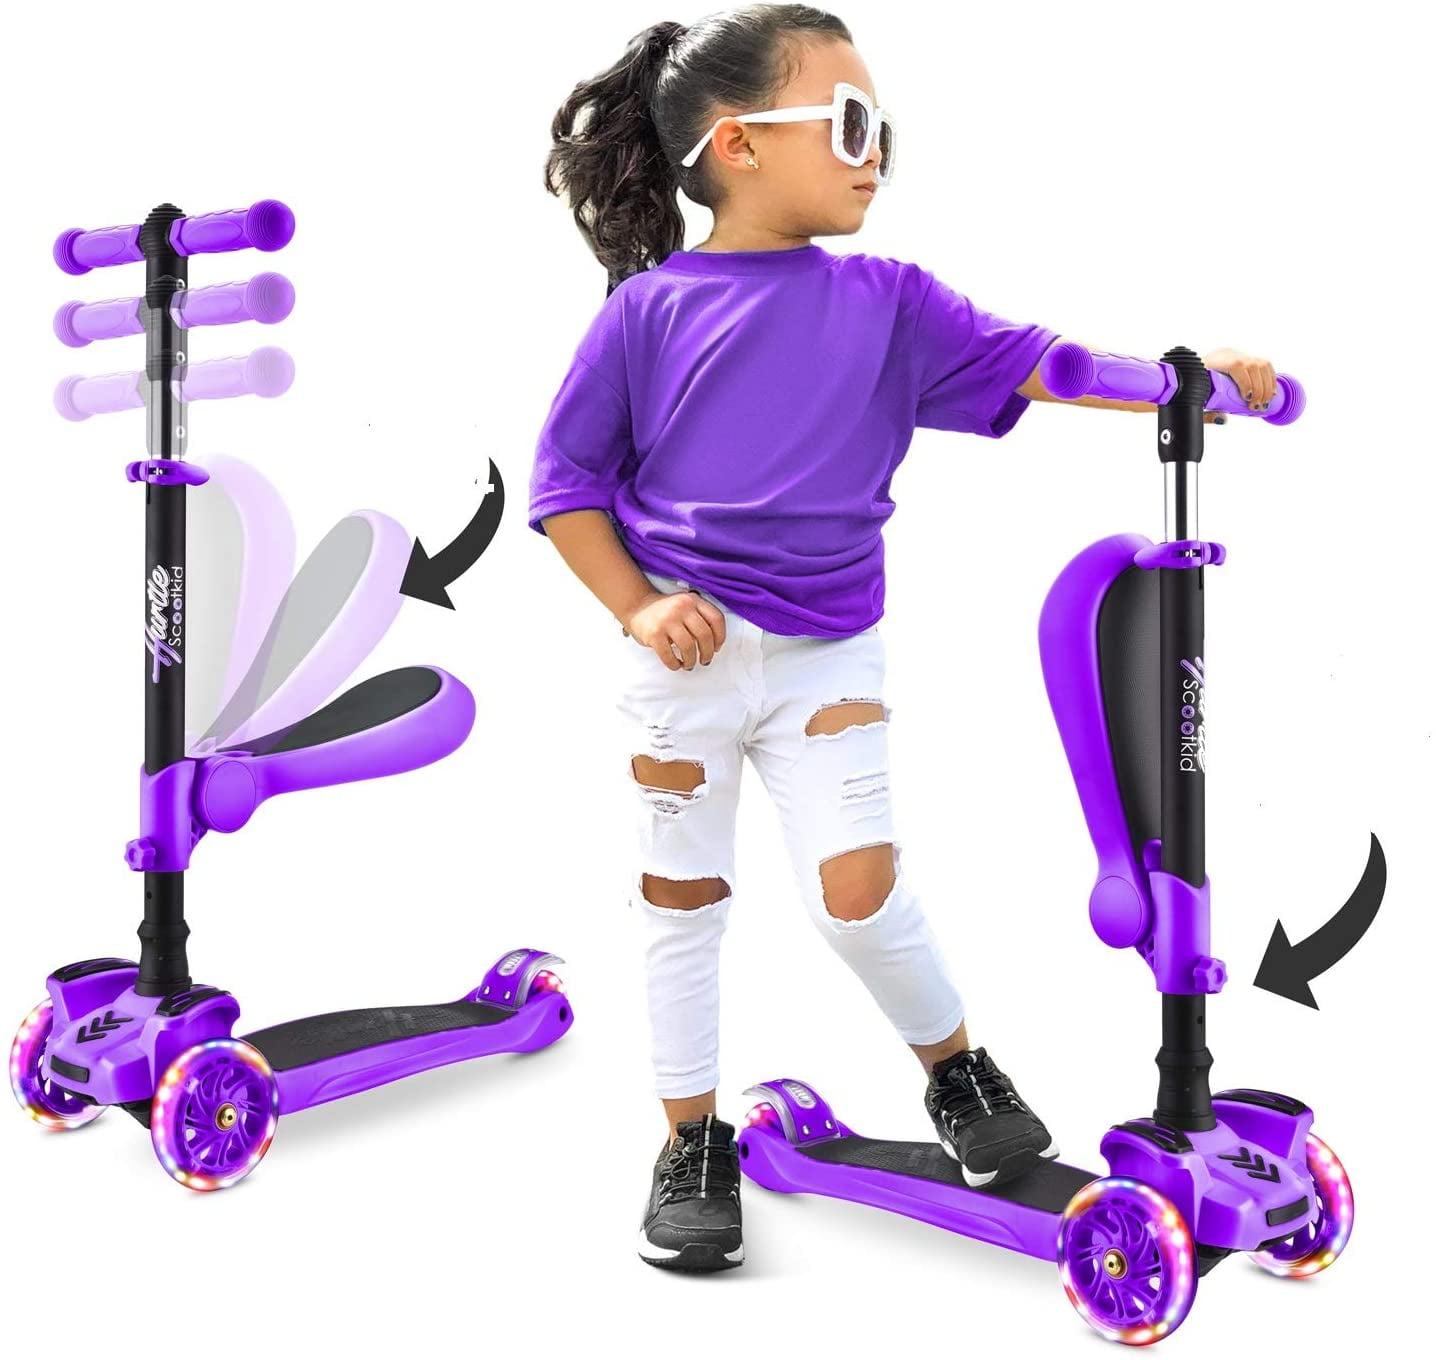 Kids Scooter 3 Wheel 3 in 1 Toddler Kick Scooter w/ Seat Light Up Boy Girl Gifts 